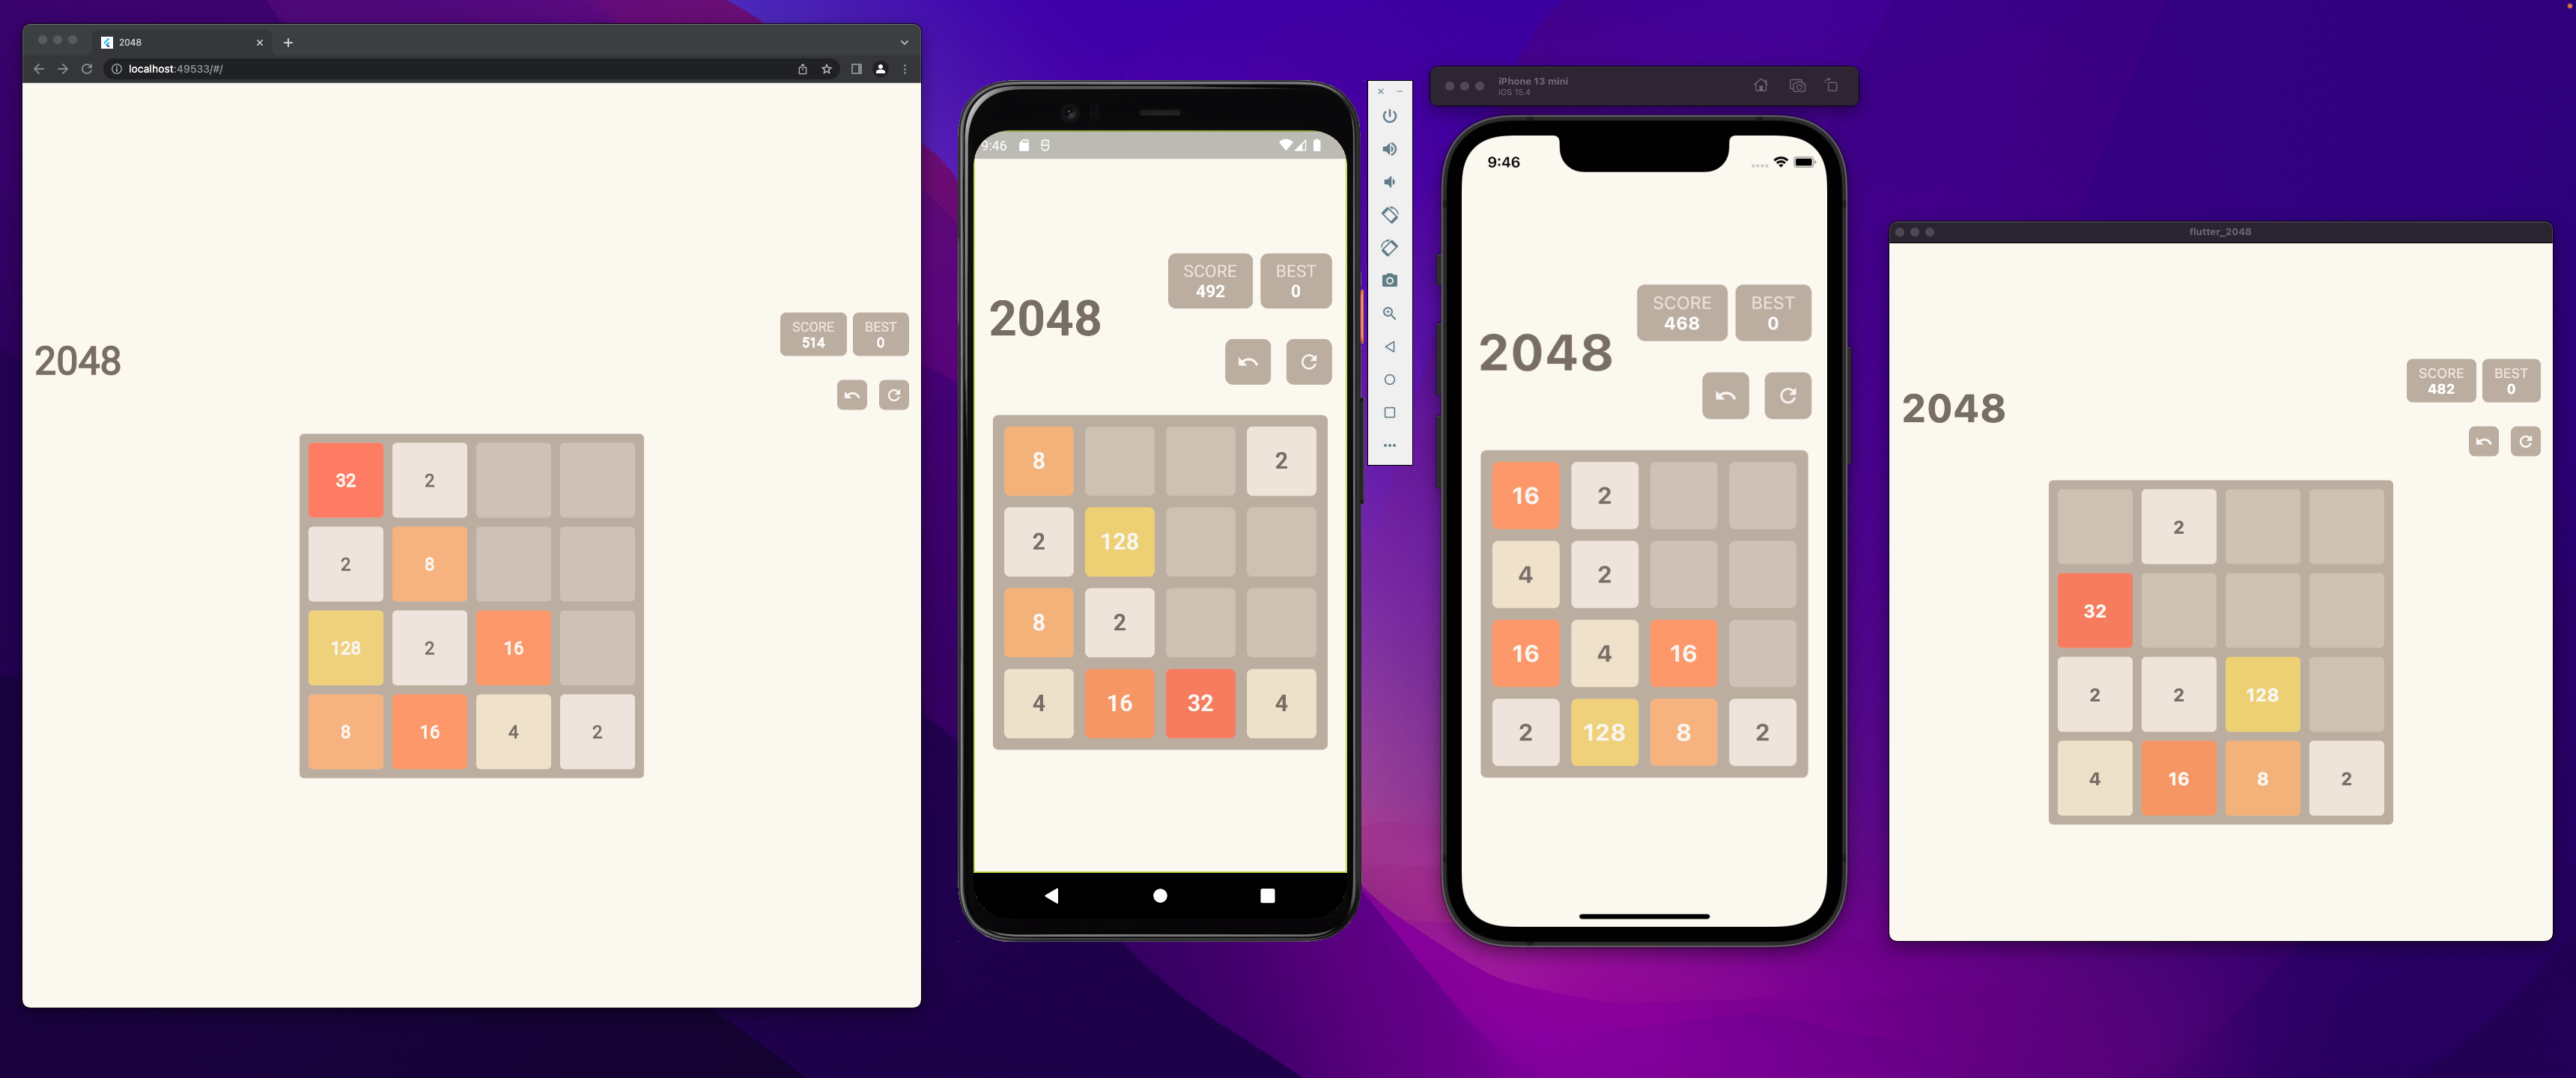 2048 Game implemented in Flutter